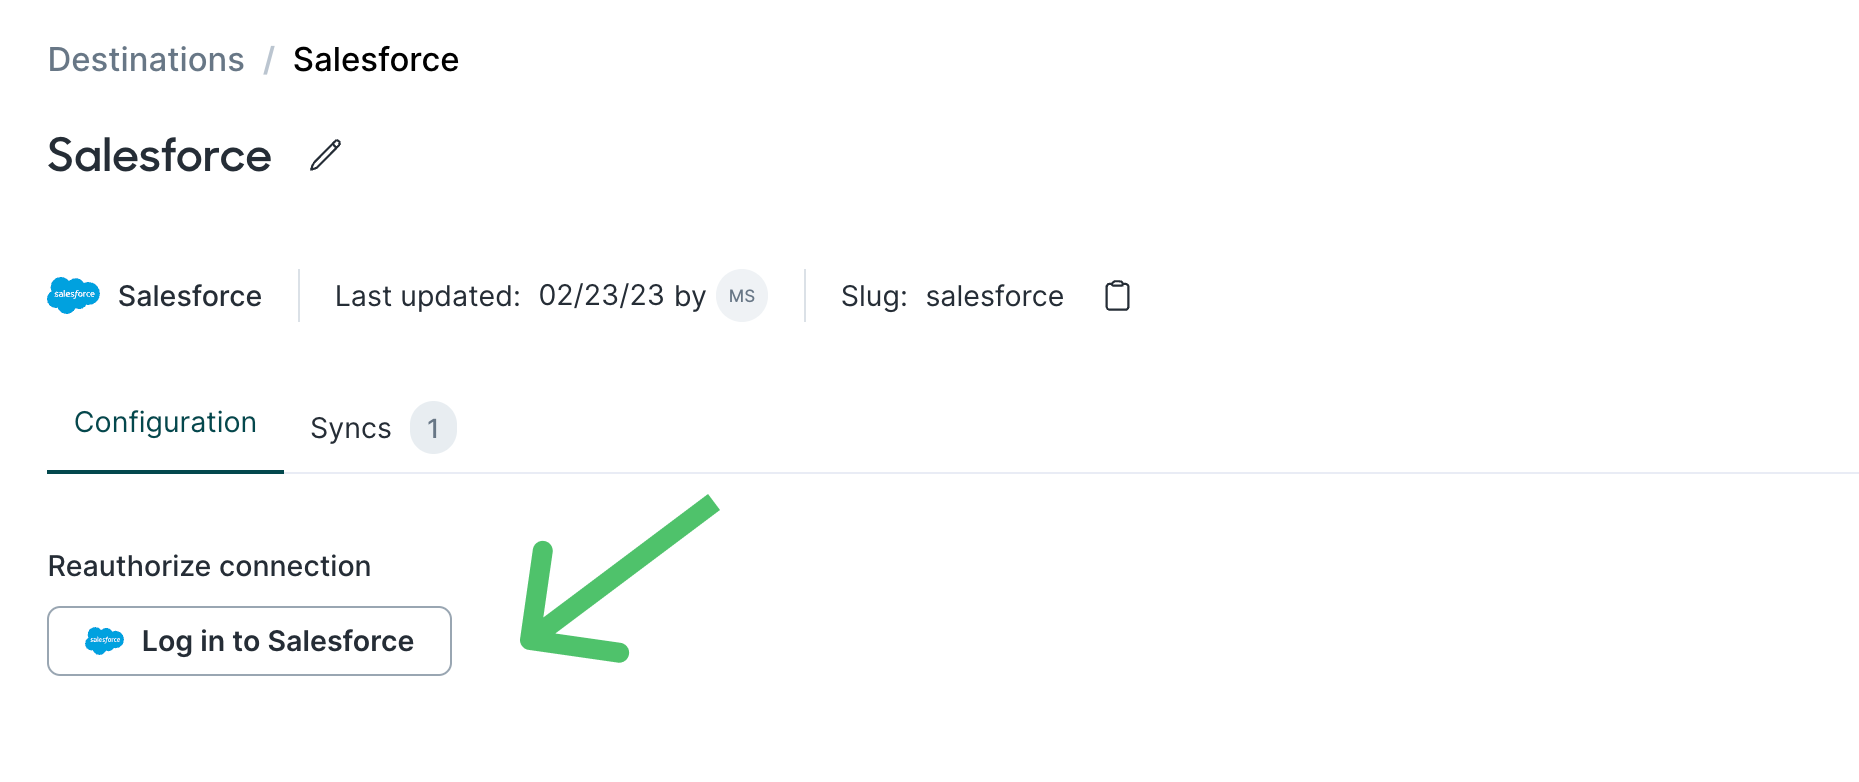 Reauthorizing the Salesforce connection in the Hightouch UI